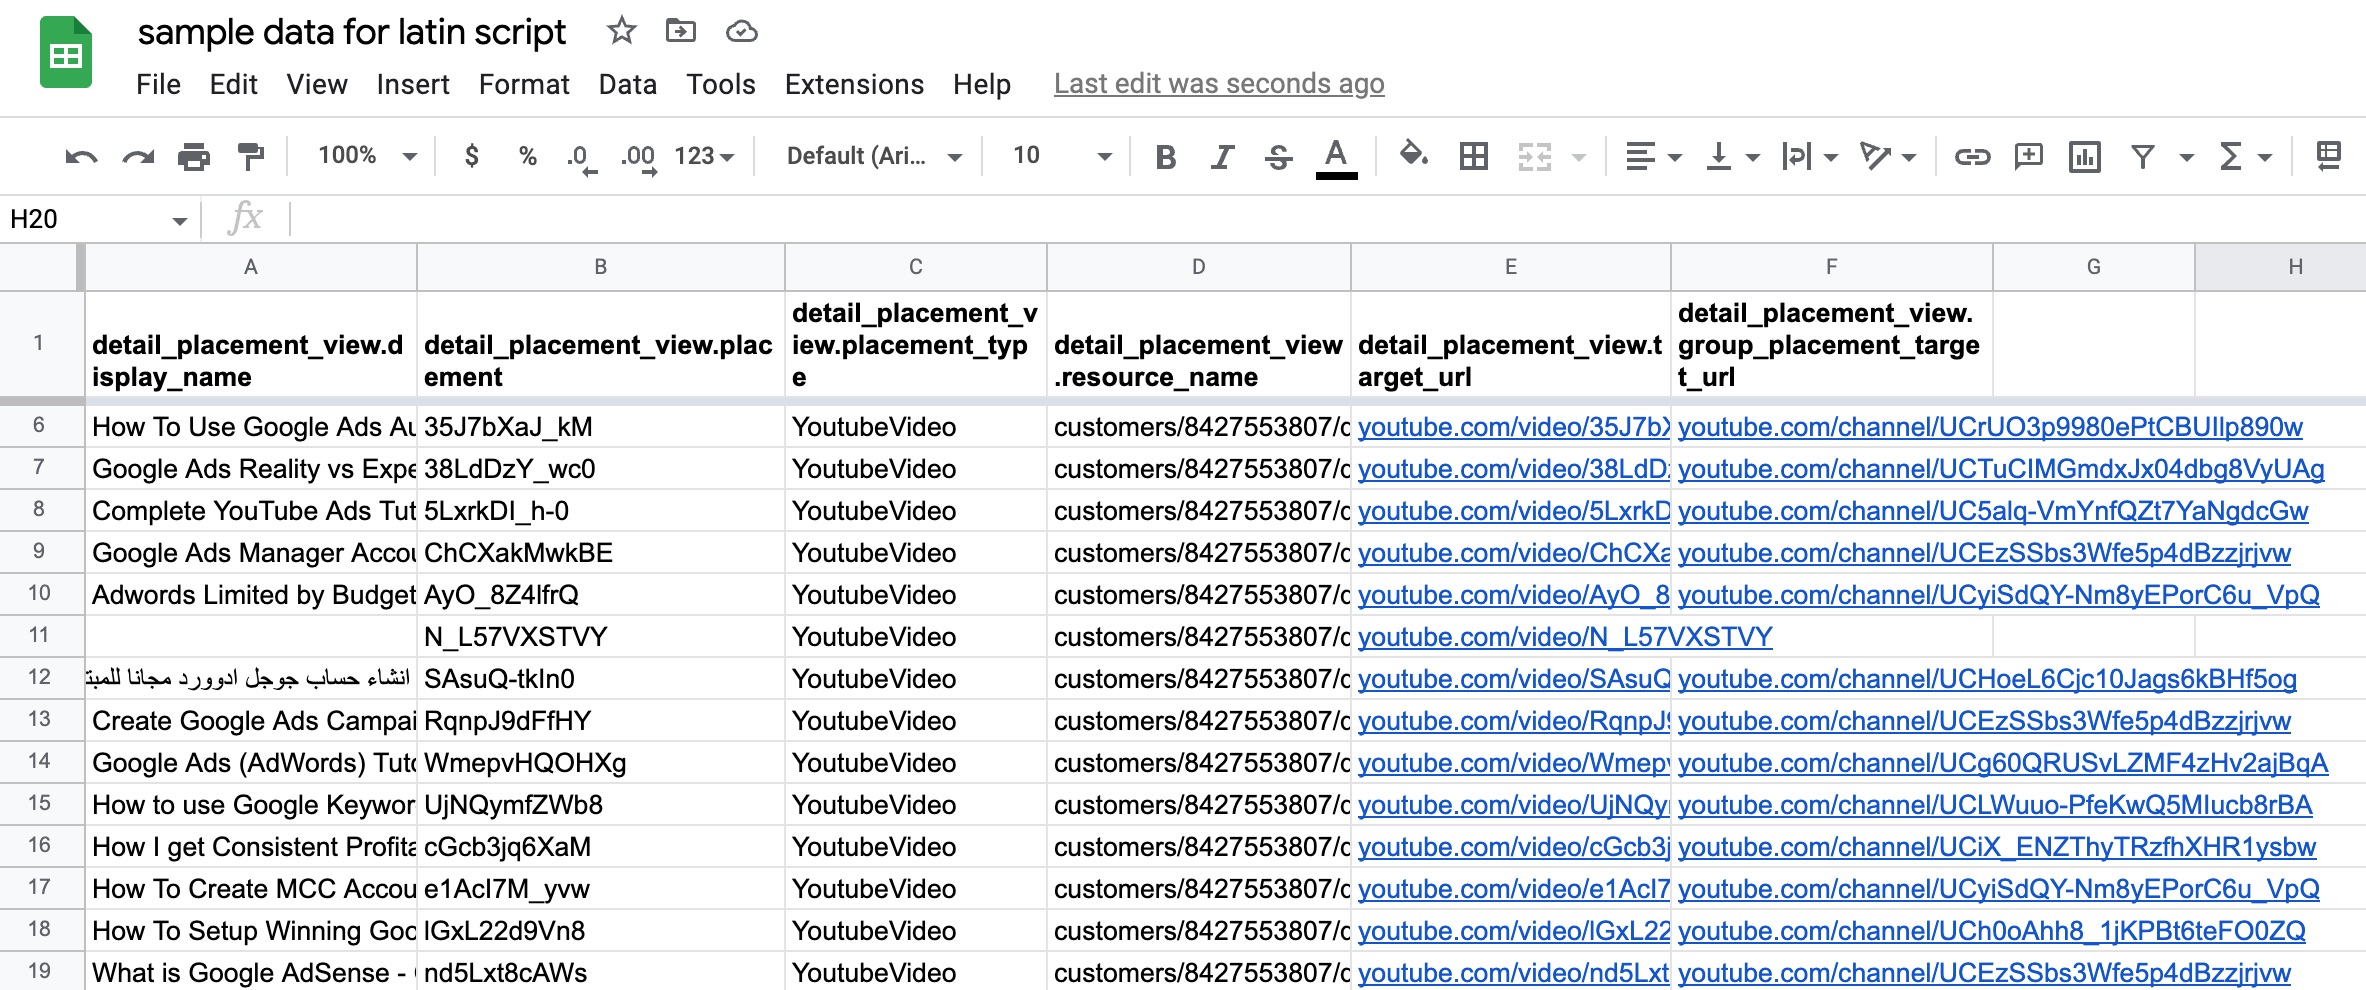 Placement details data in a Google Sheet